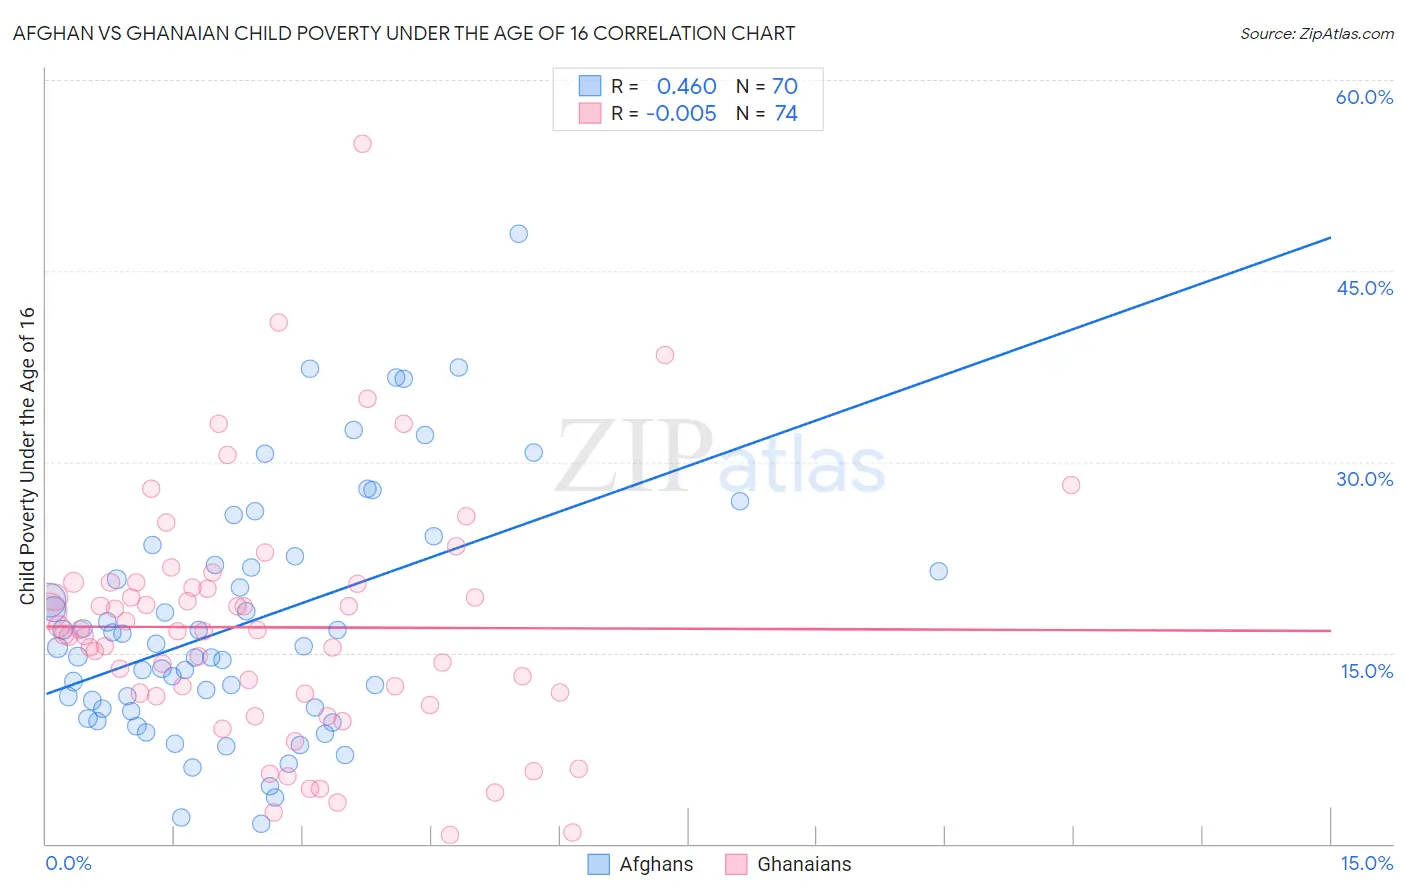 Afghan vs Ghanaian Child Poverty Under the Age of 16